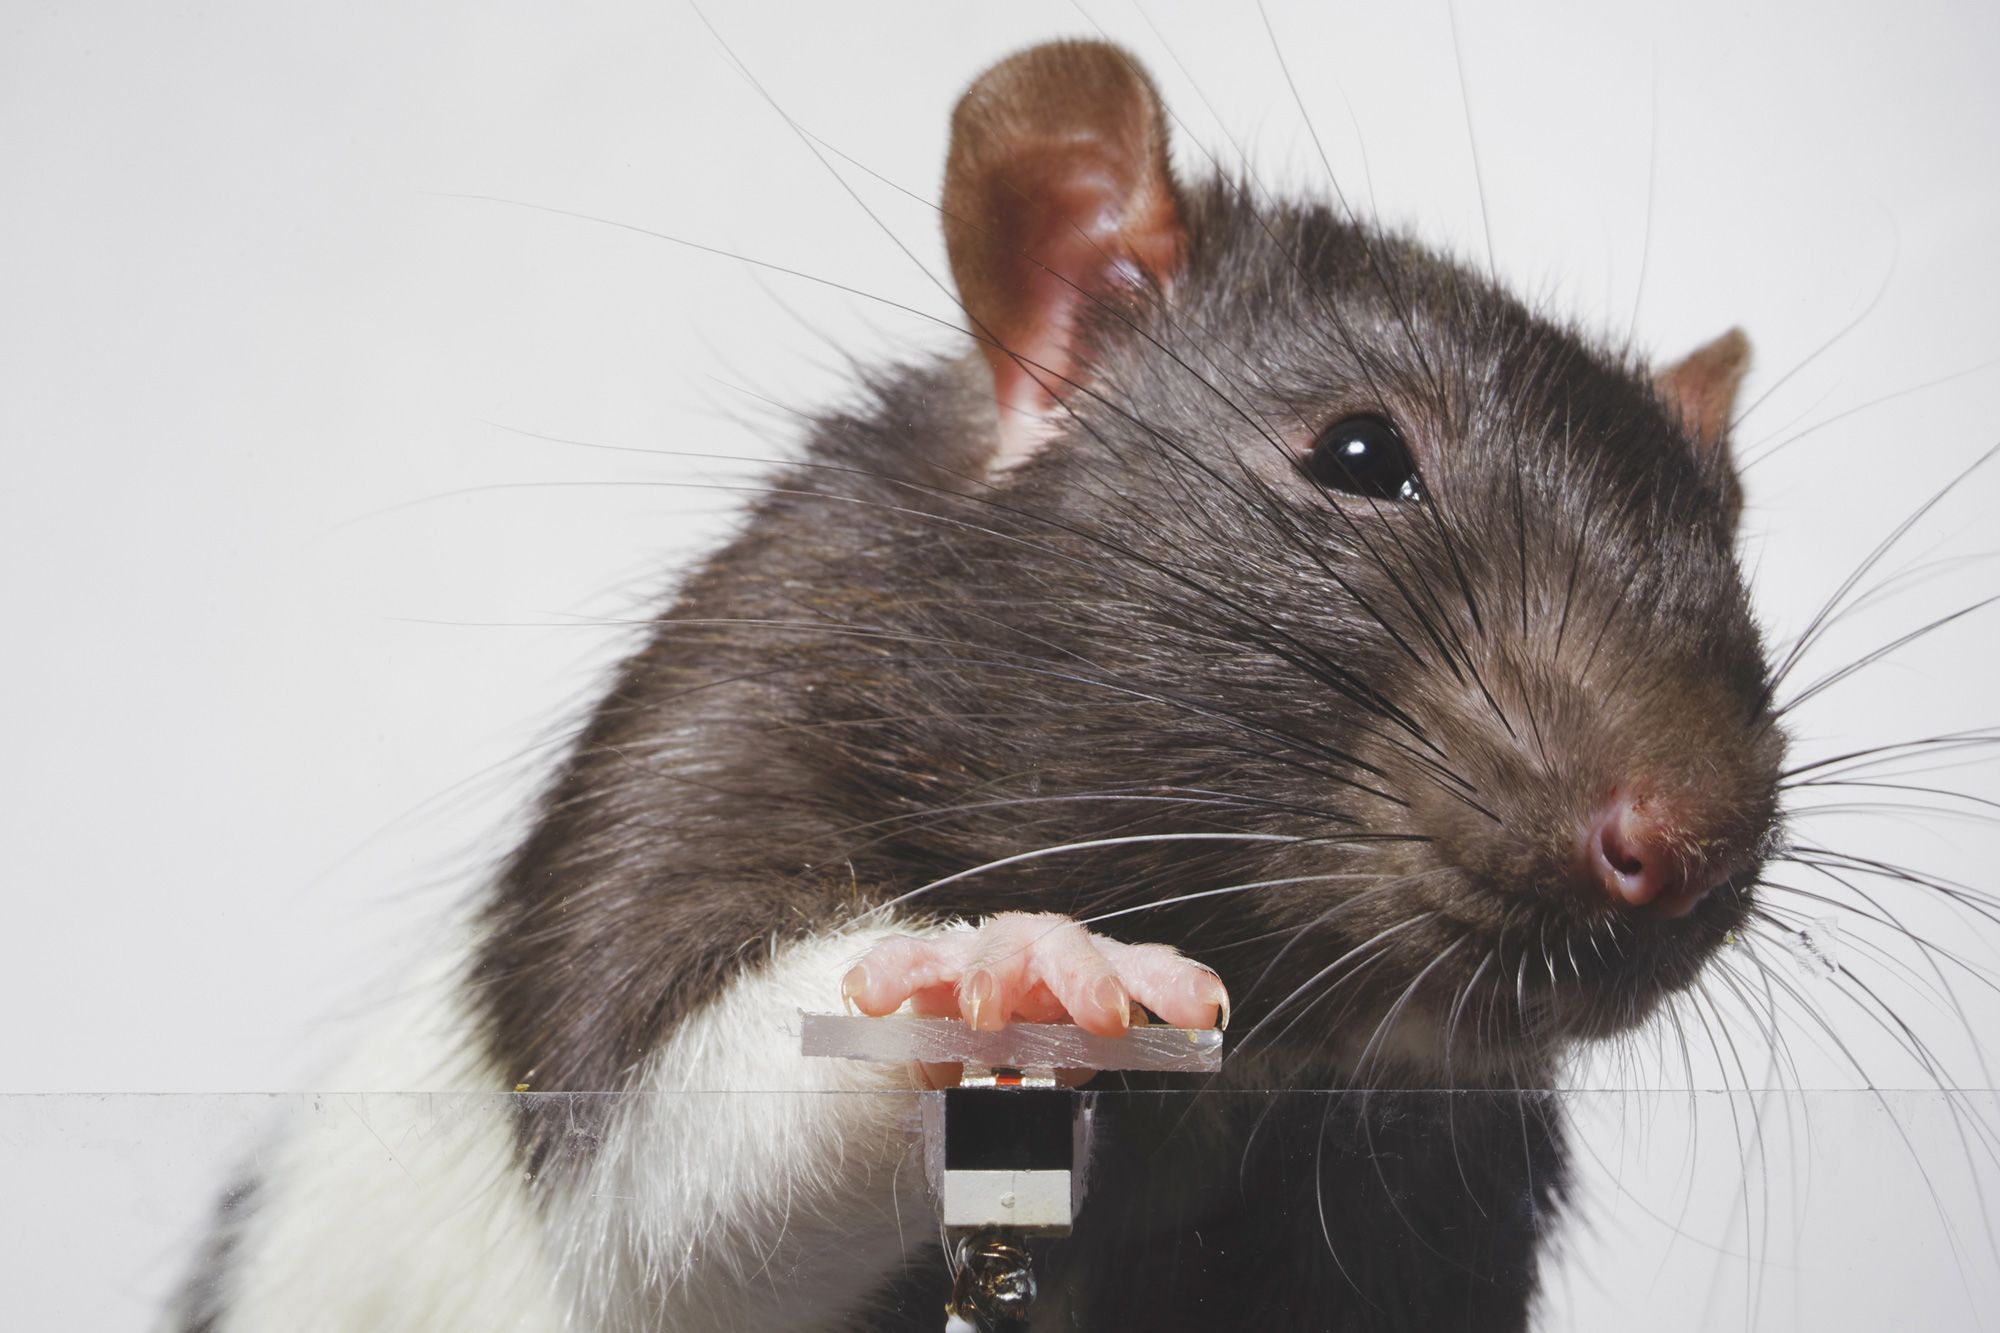 In a project devised by French artist Augustin Lignier, two rats were trained to take selfies via a button-operated camera.